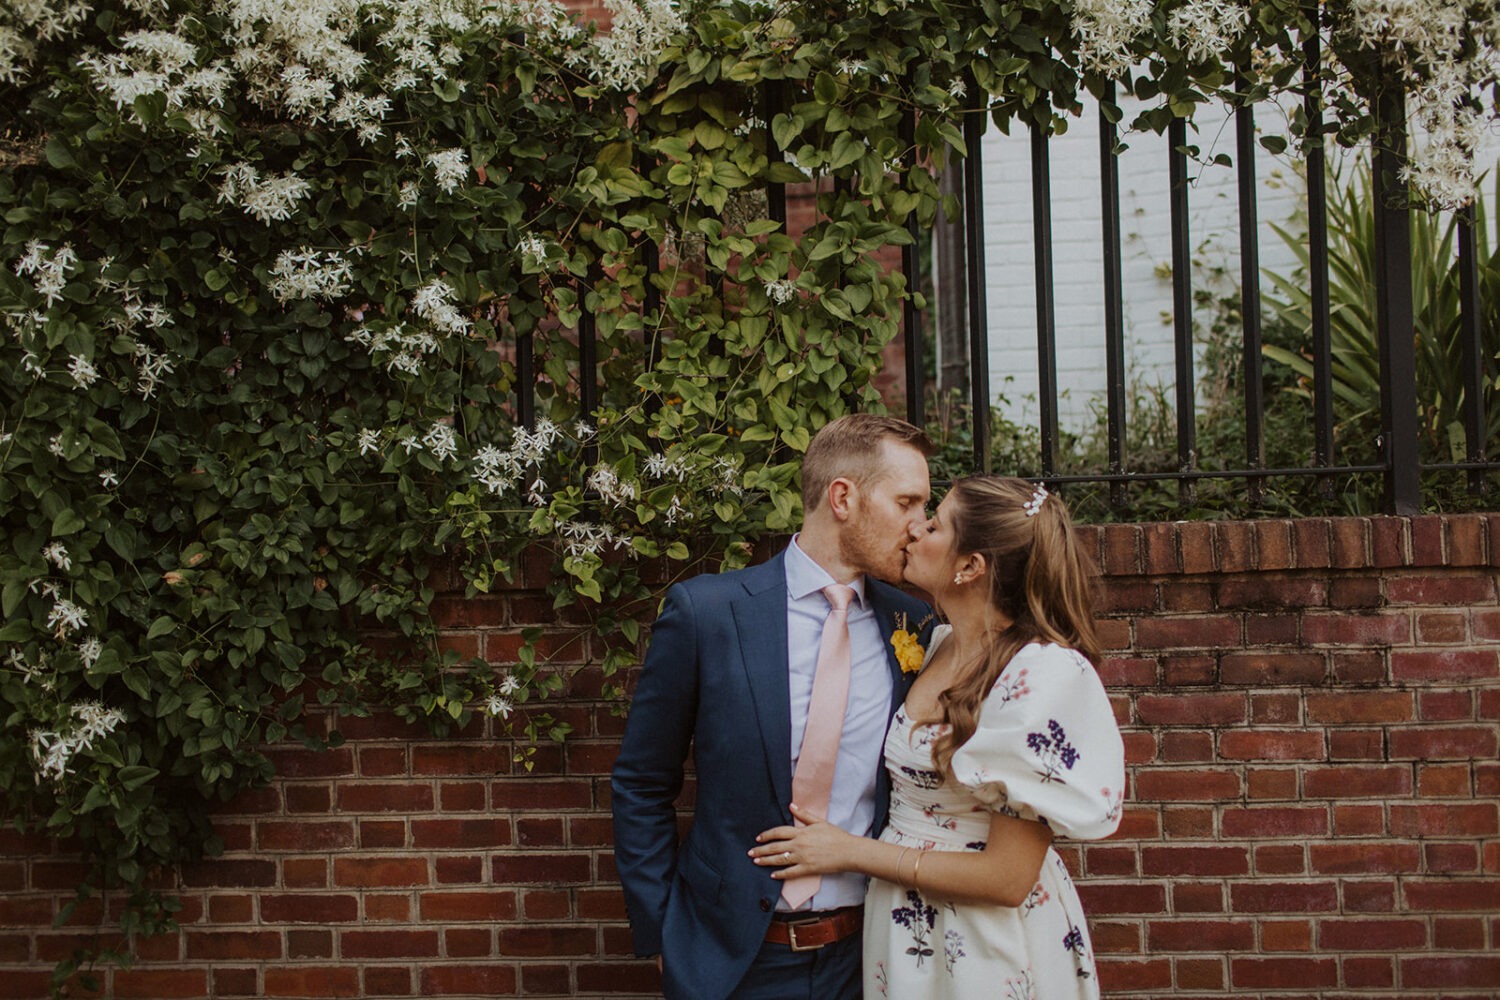 couple kisses in front of brick and flowers at Dumbarton House garden wedding